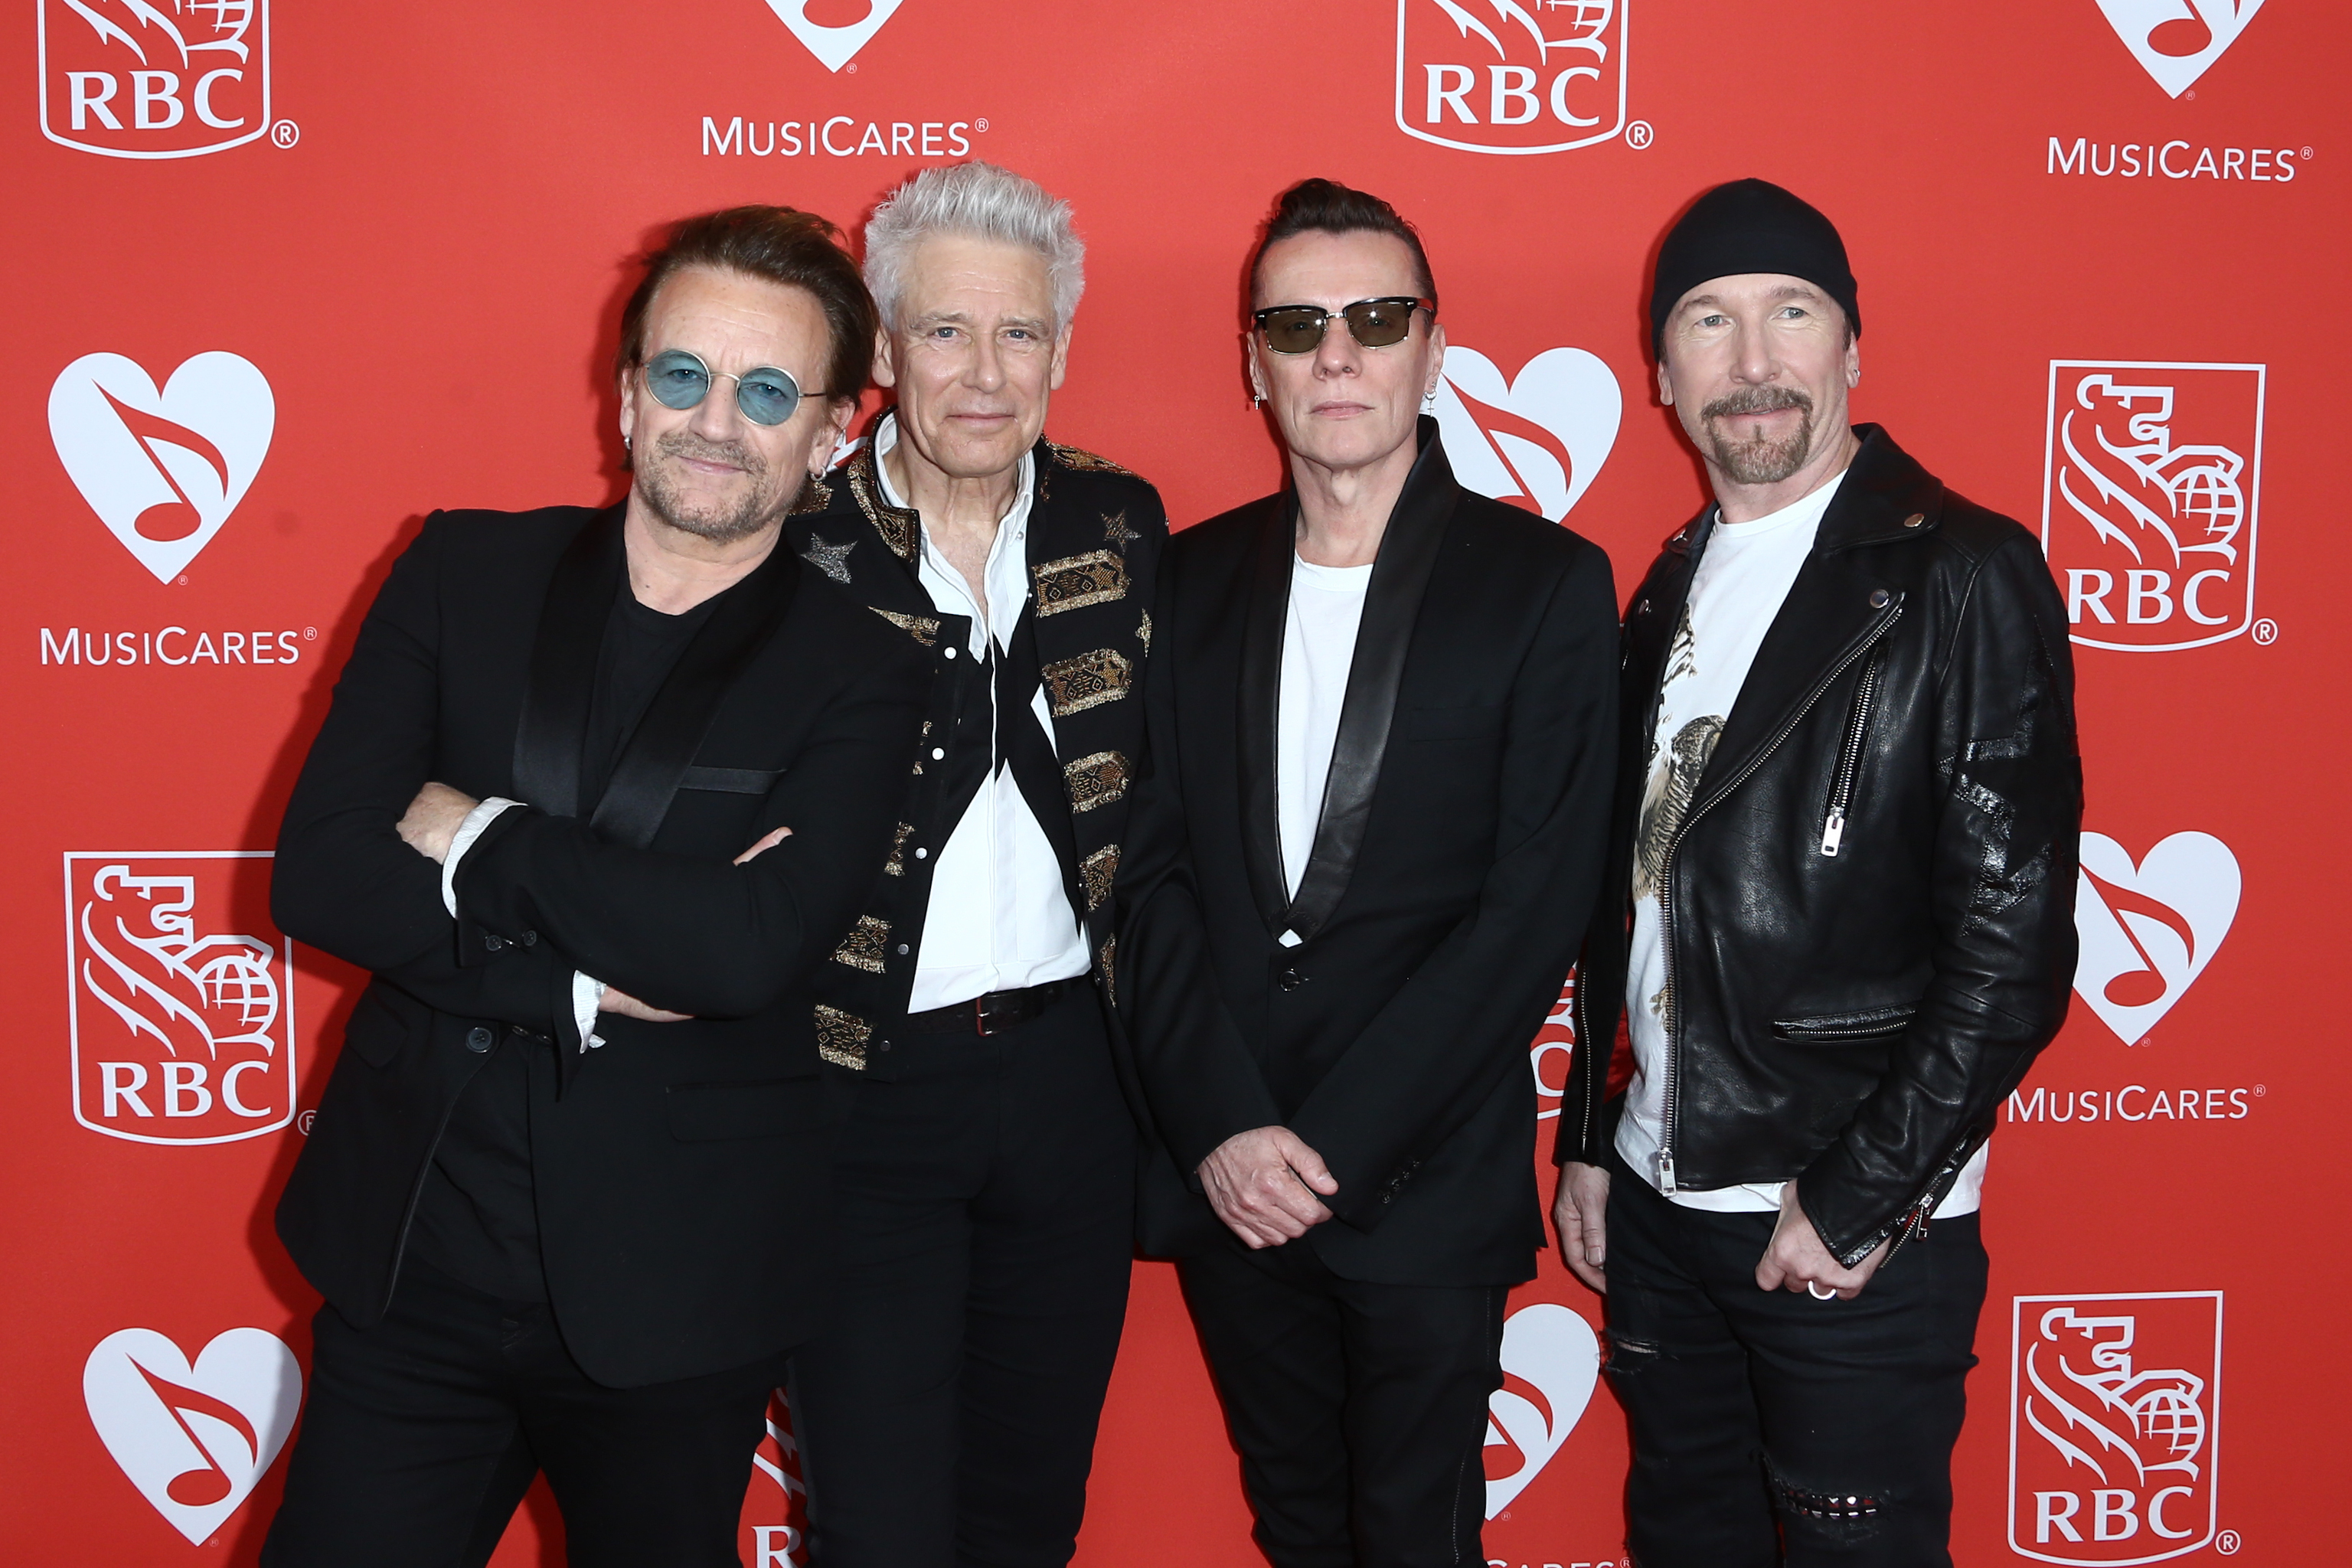 Bono, Adam Clayton, Larry Mullen Jr and The Edge of U2, pictured in 2017.